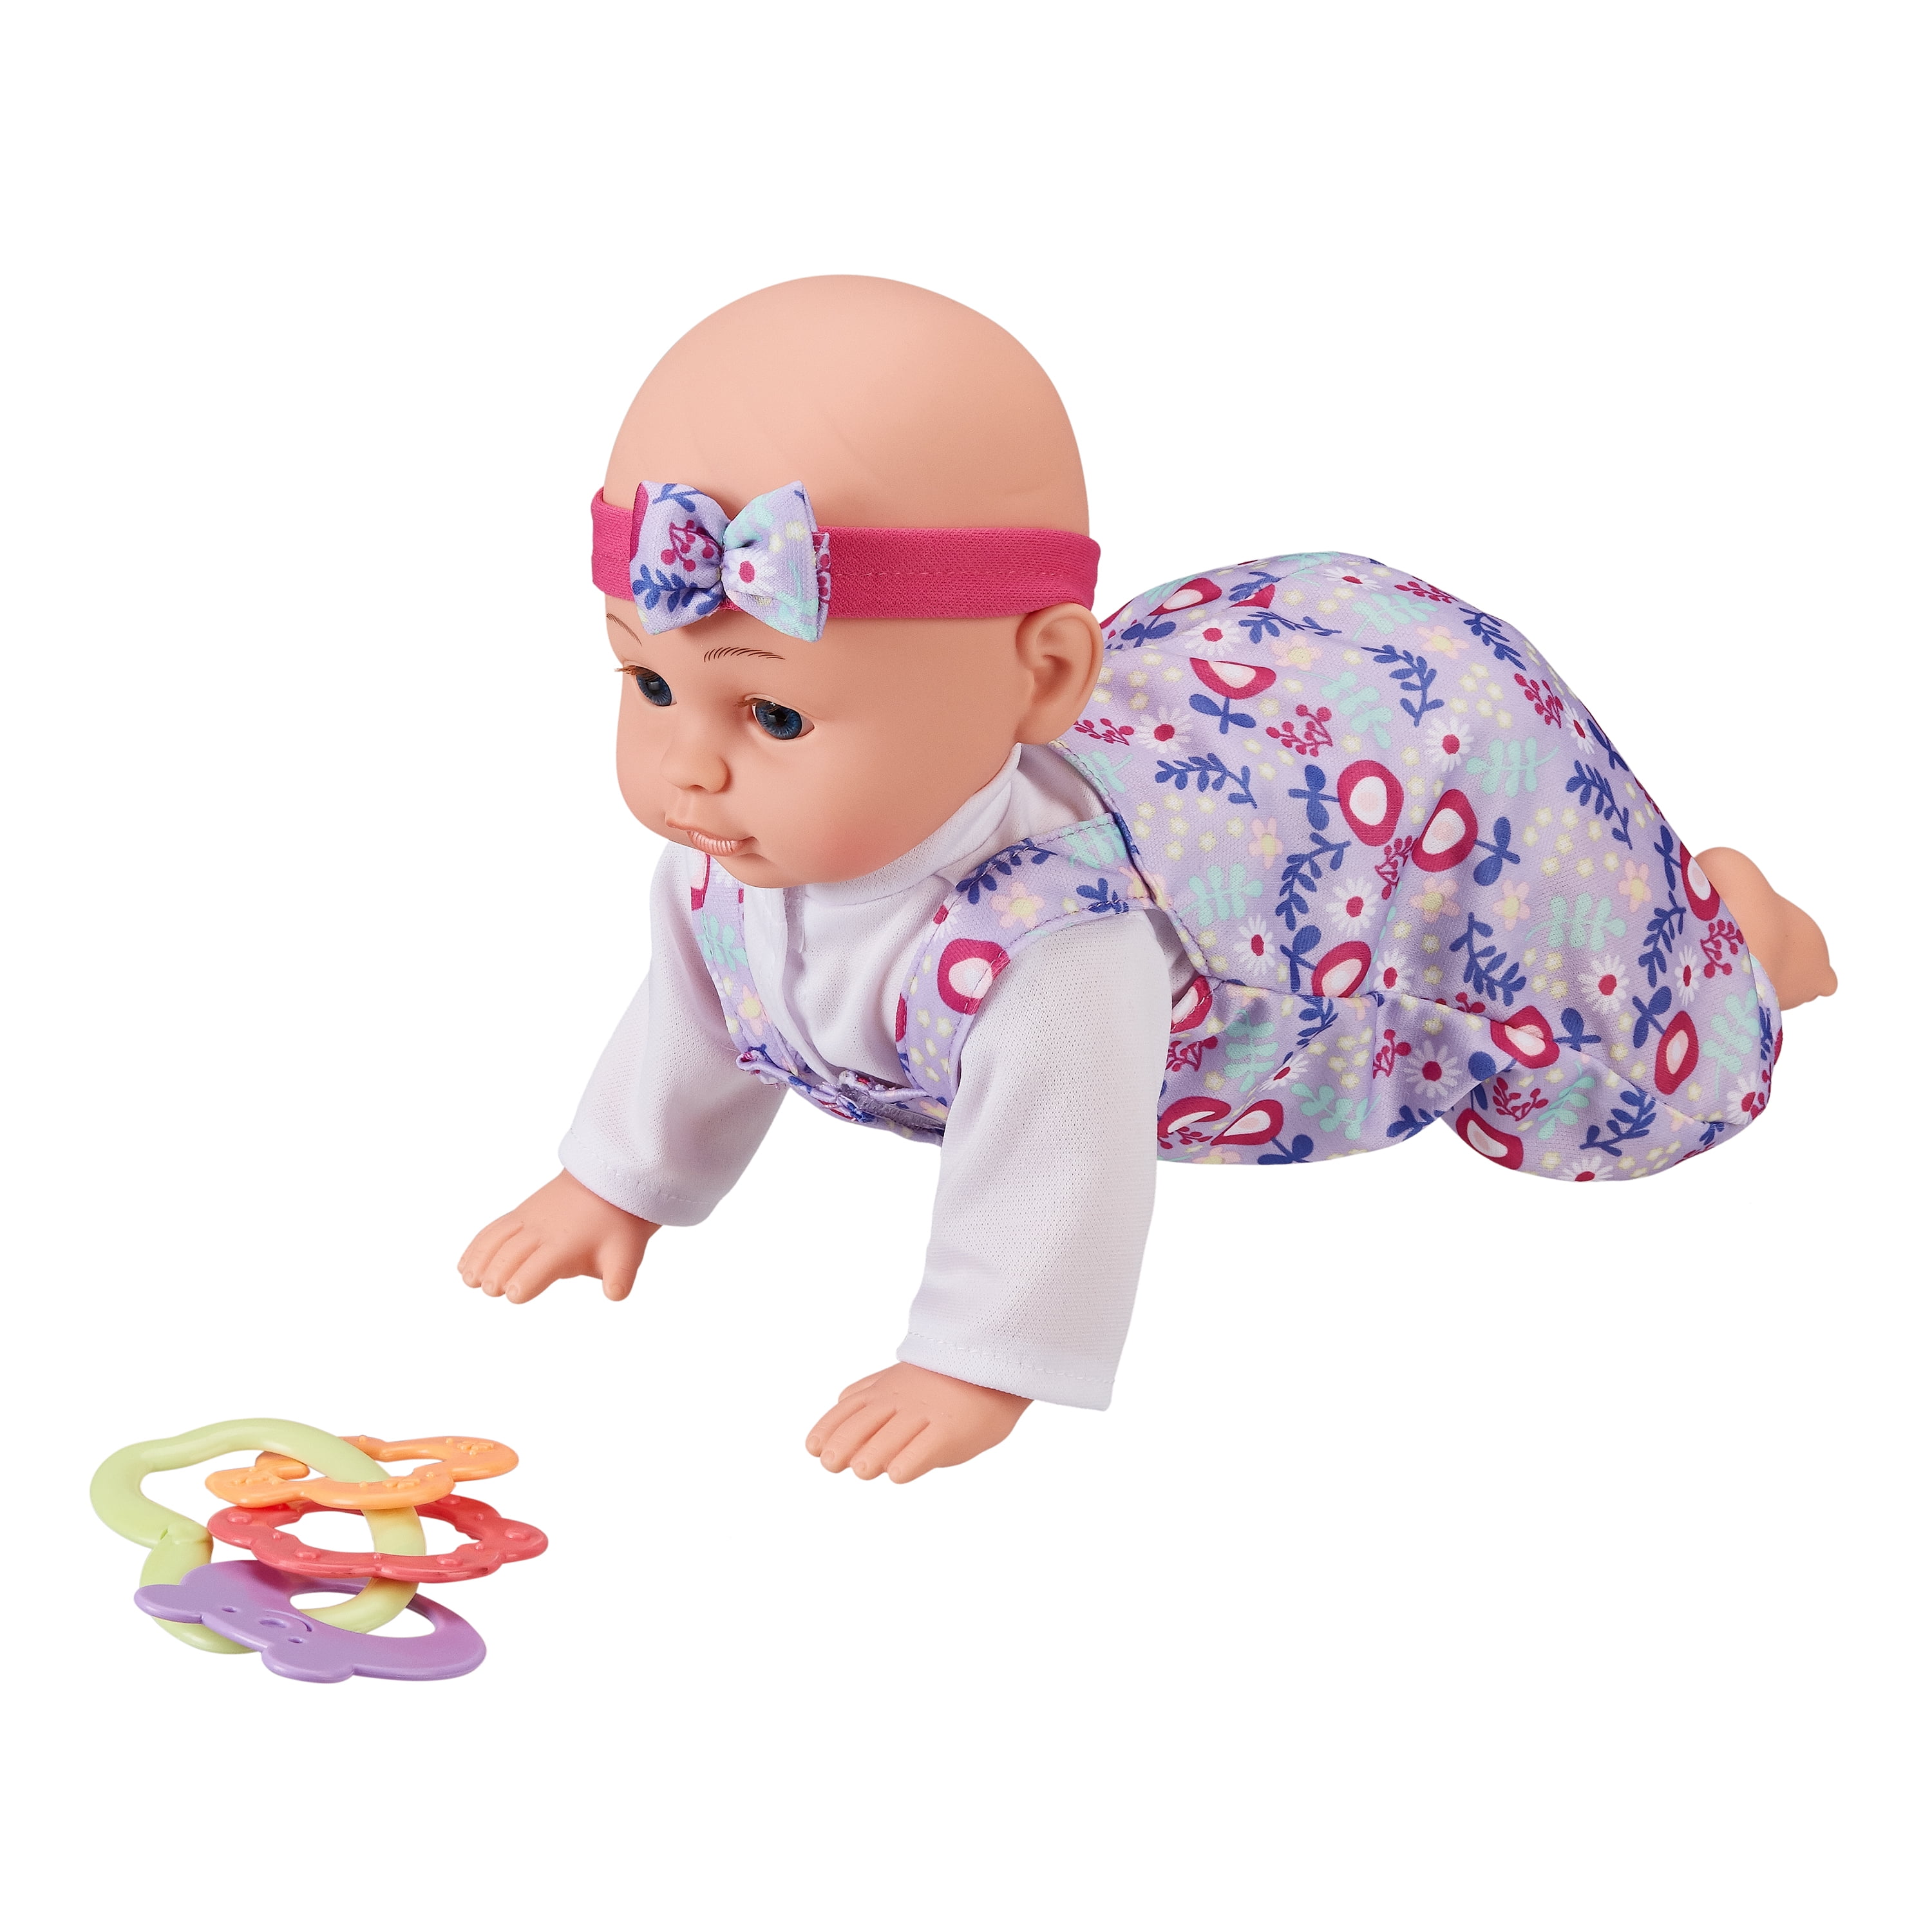 BRAND NEW IN BOX Baby Magic Crawling Scented Baby Doll Playset w/ Accessories